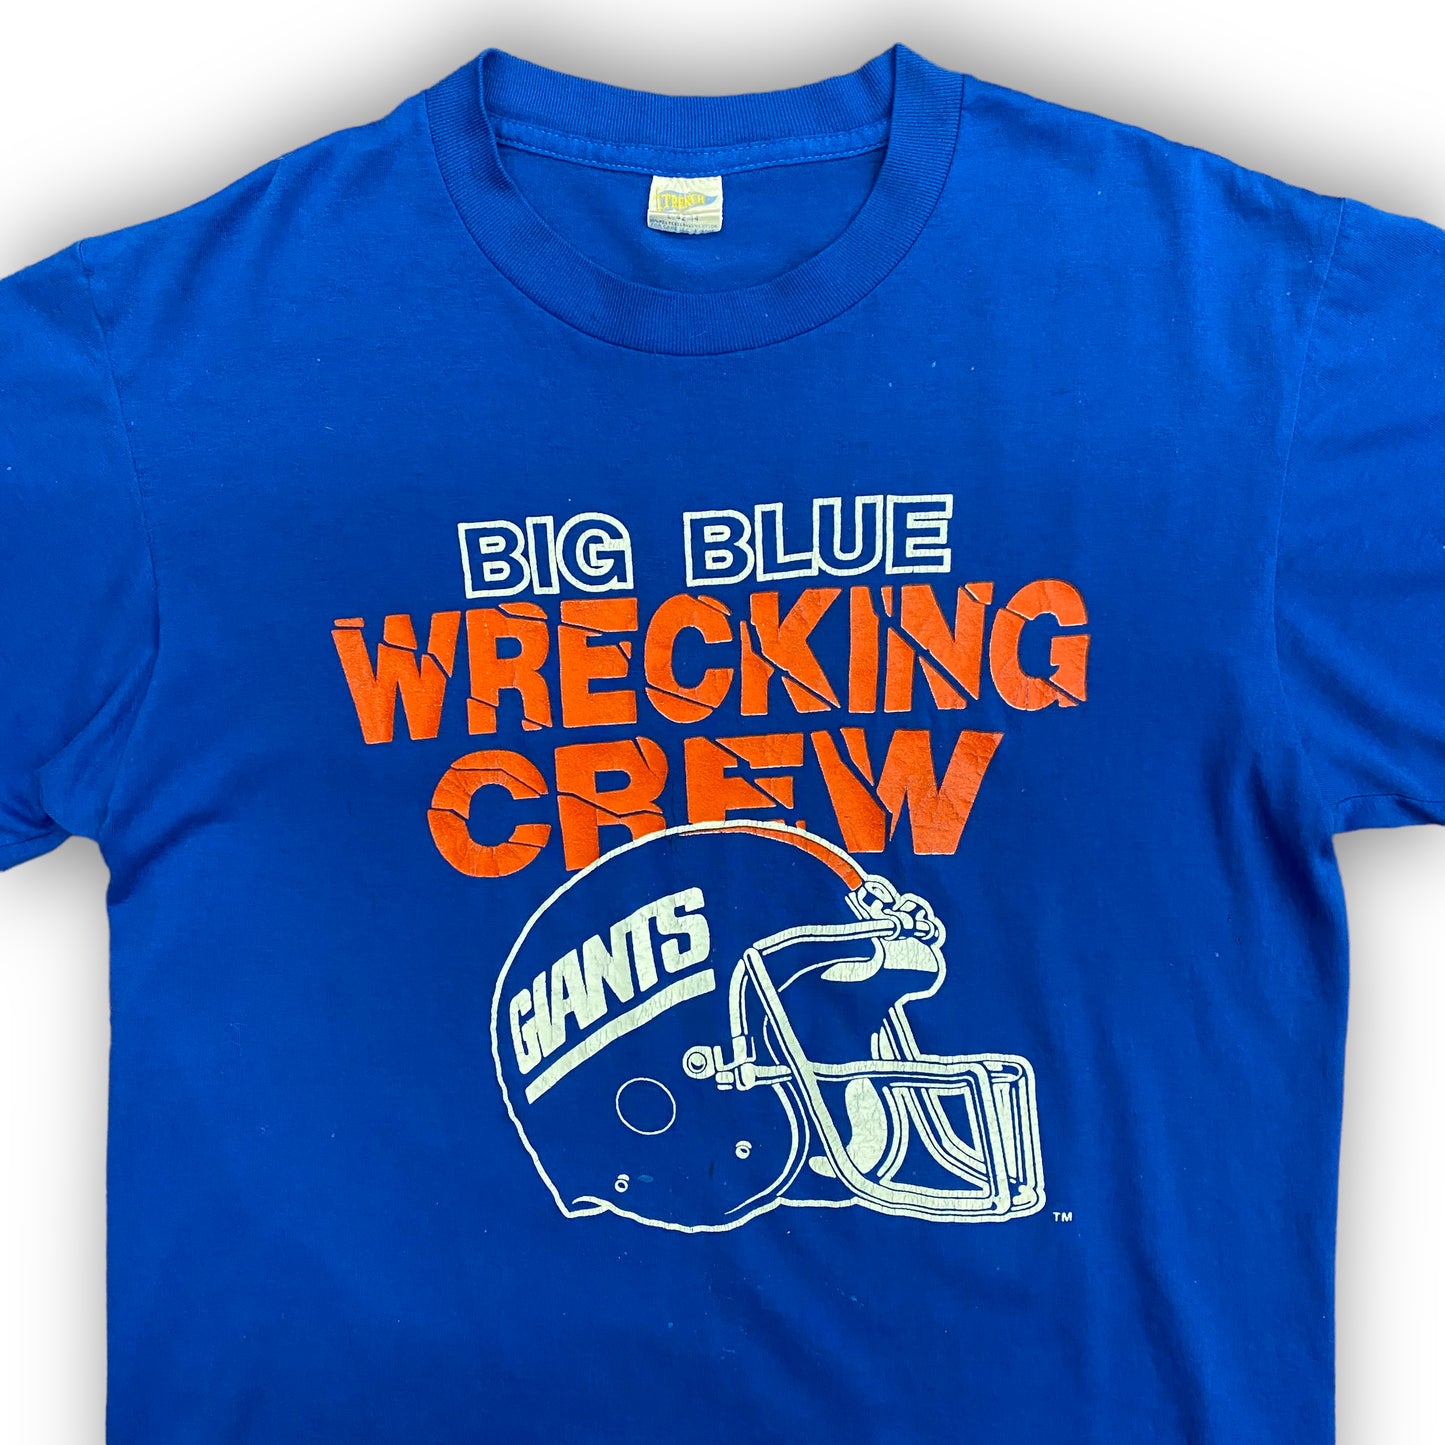 Vintage 1980s New York Giants "Big Blue Wrecking Crew" Tee - Size Large